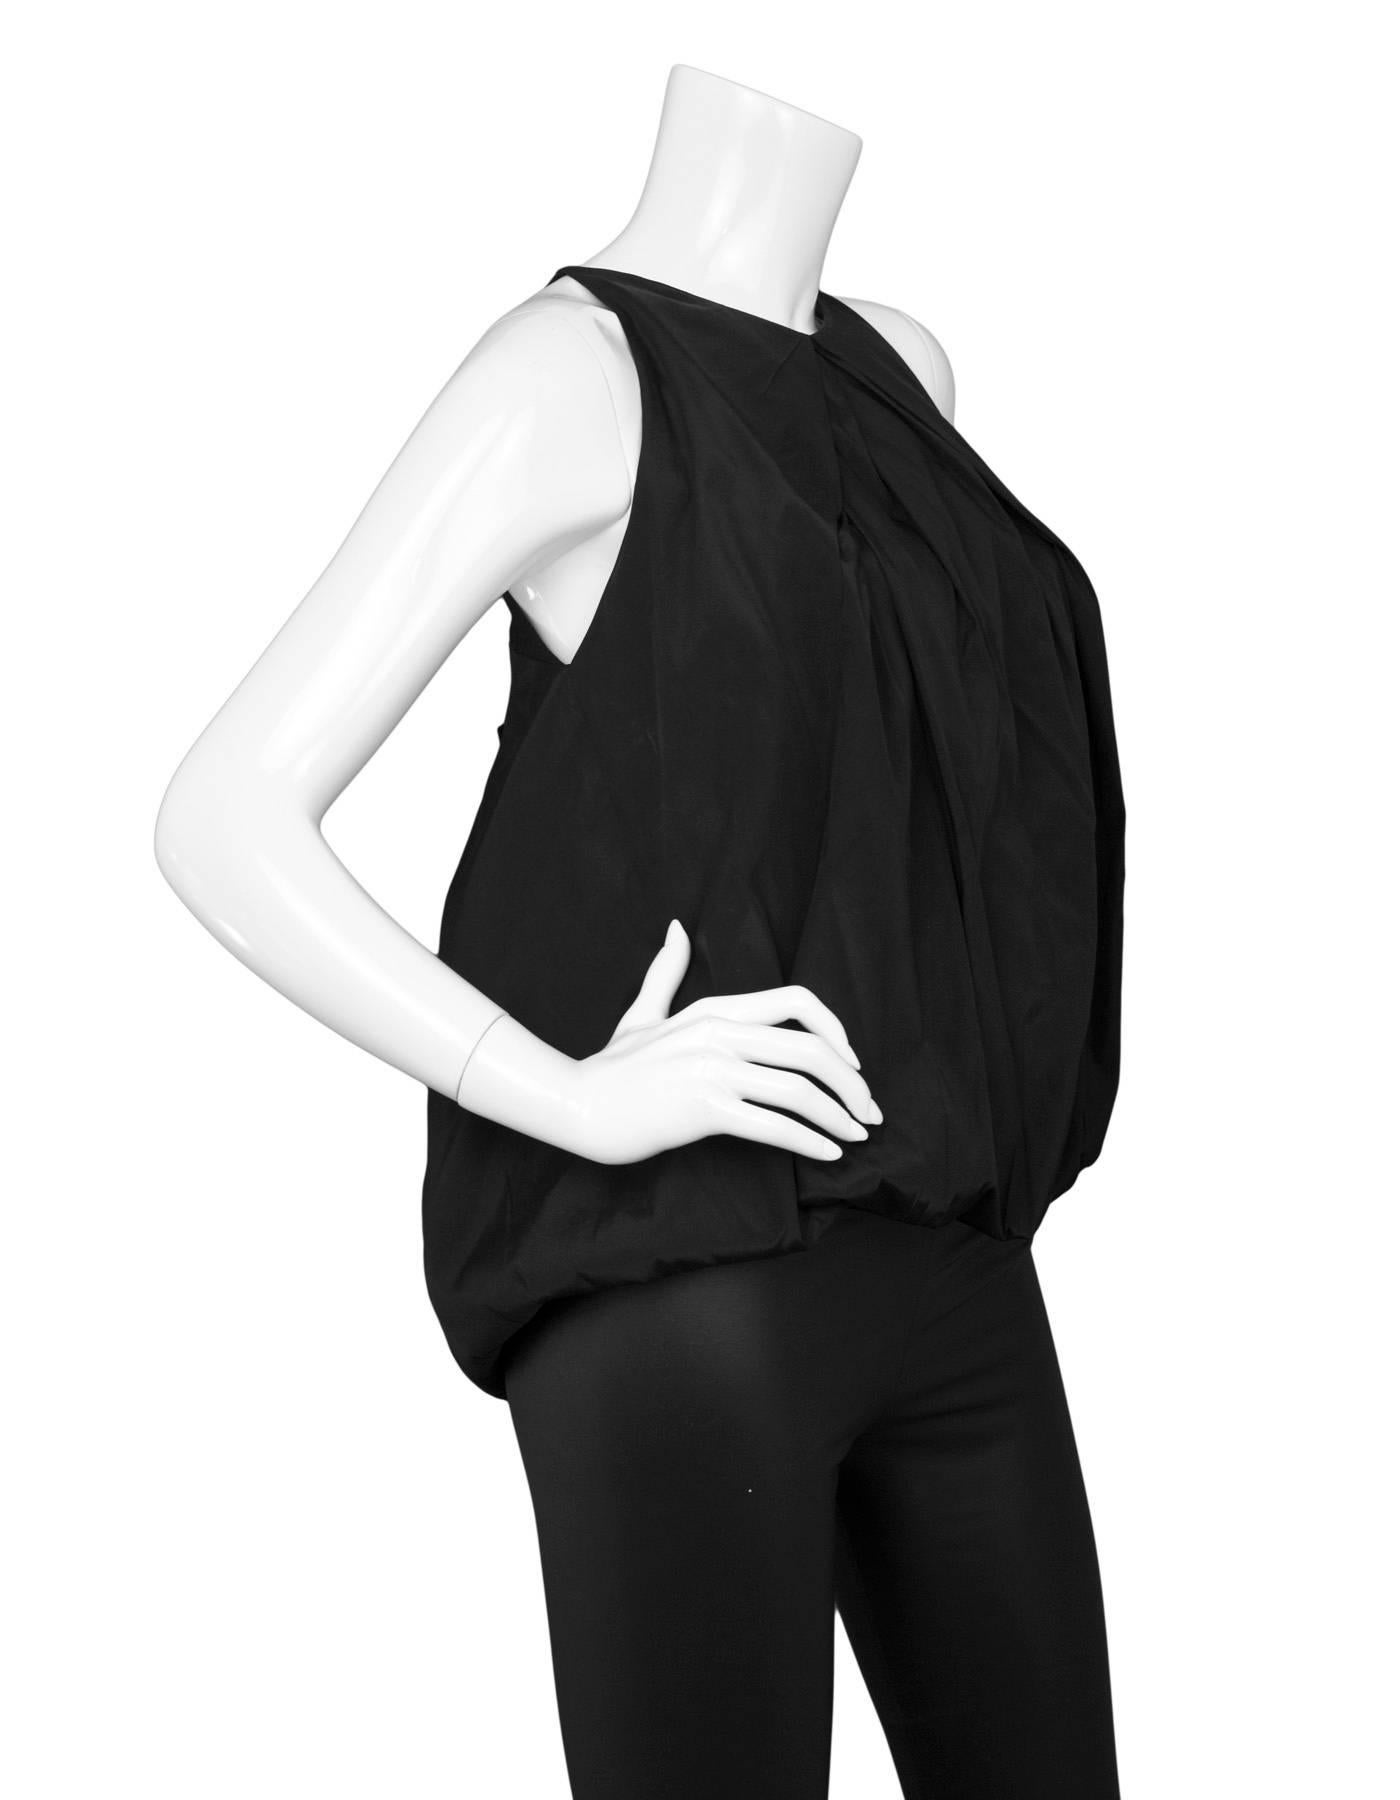 Donna Karan Black Silk Sleeveless Balloon Top 
Features bow at back

Made In: China
Color: Black 
Composition: 100% silk
Lining: Black, 100% viscose
Closure/Opening: Pull over
Exterior Pockets: None
Interior Pockets: None
Overall Condition: